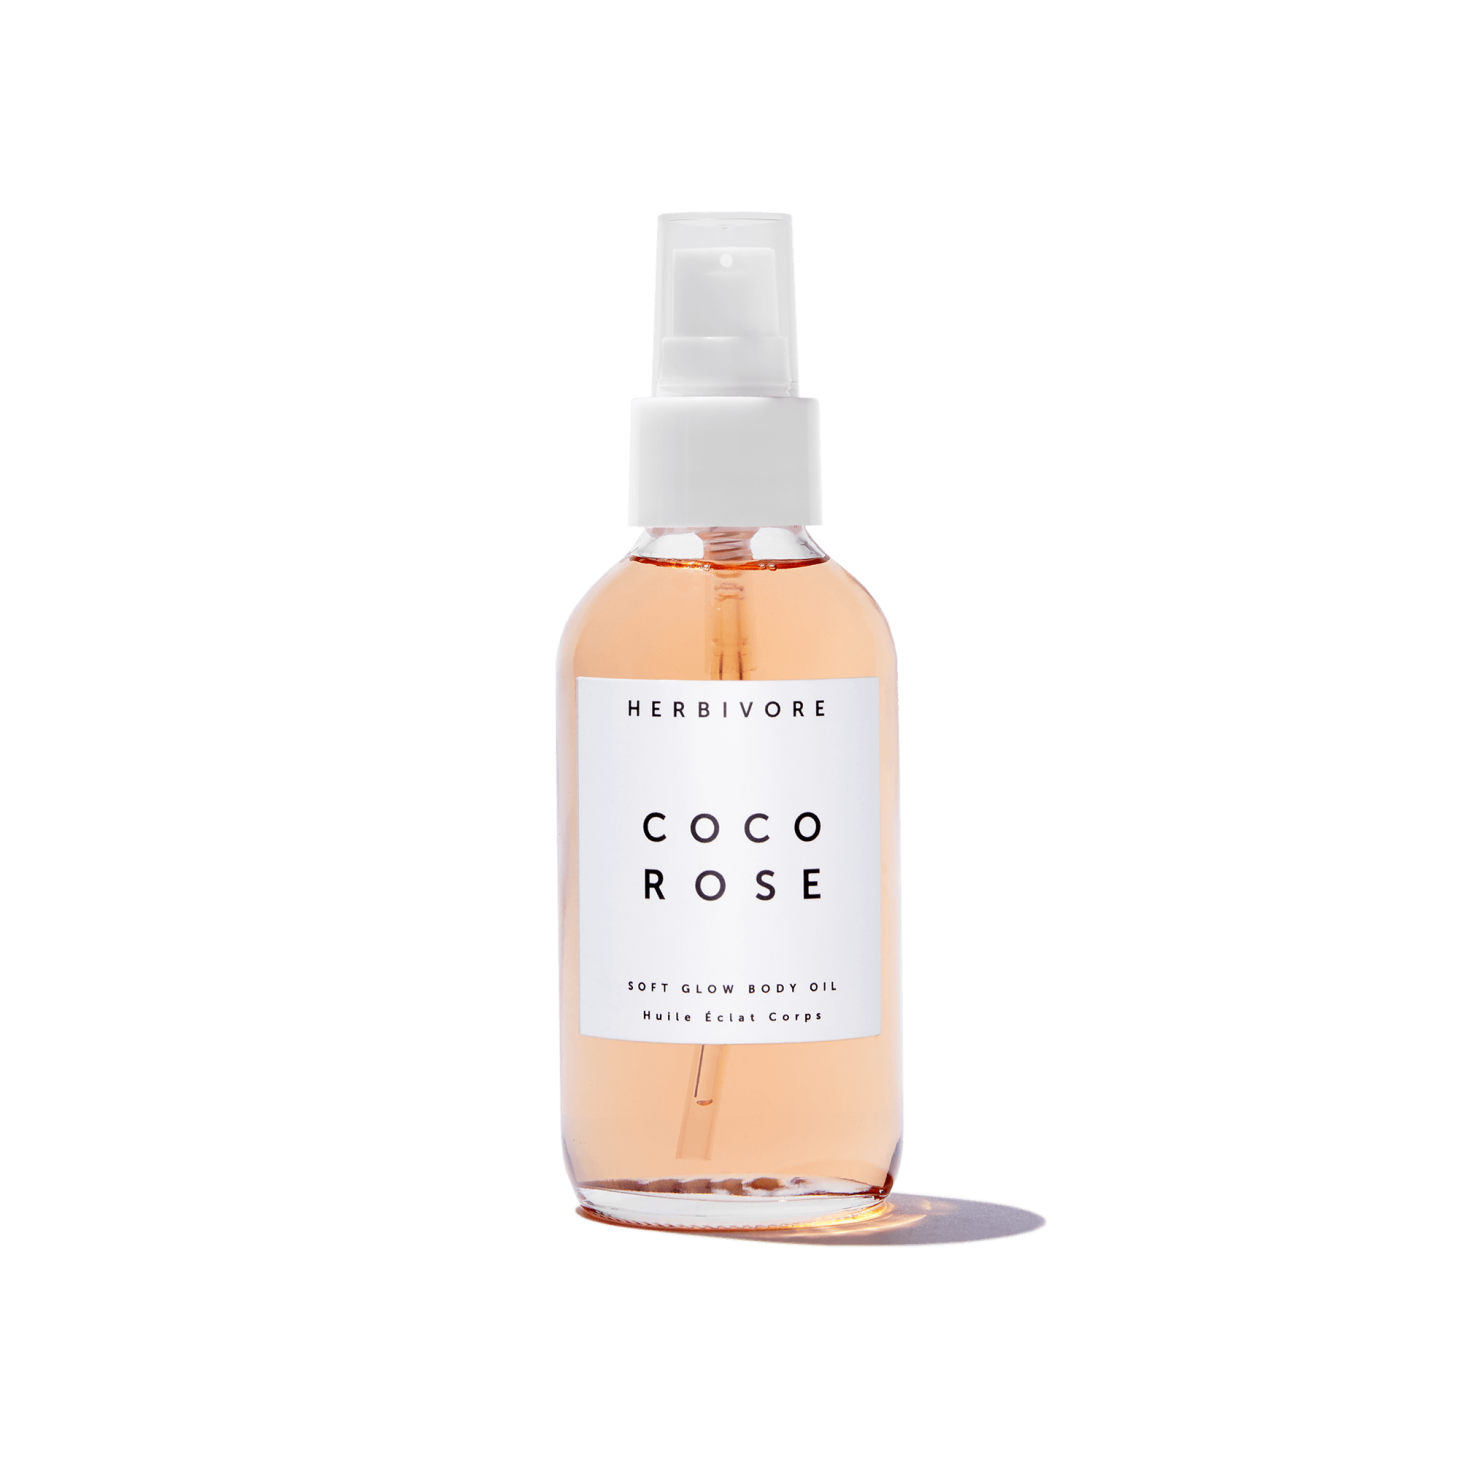 Herbivore Botanicals Coco Rose Soft Glow Body Oil, credo friends and family sale